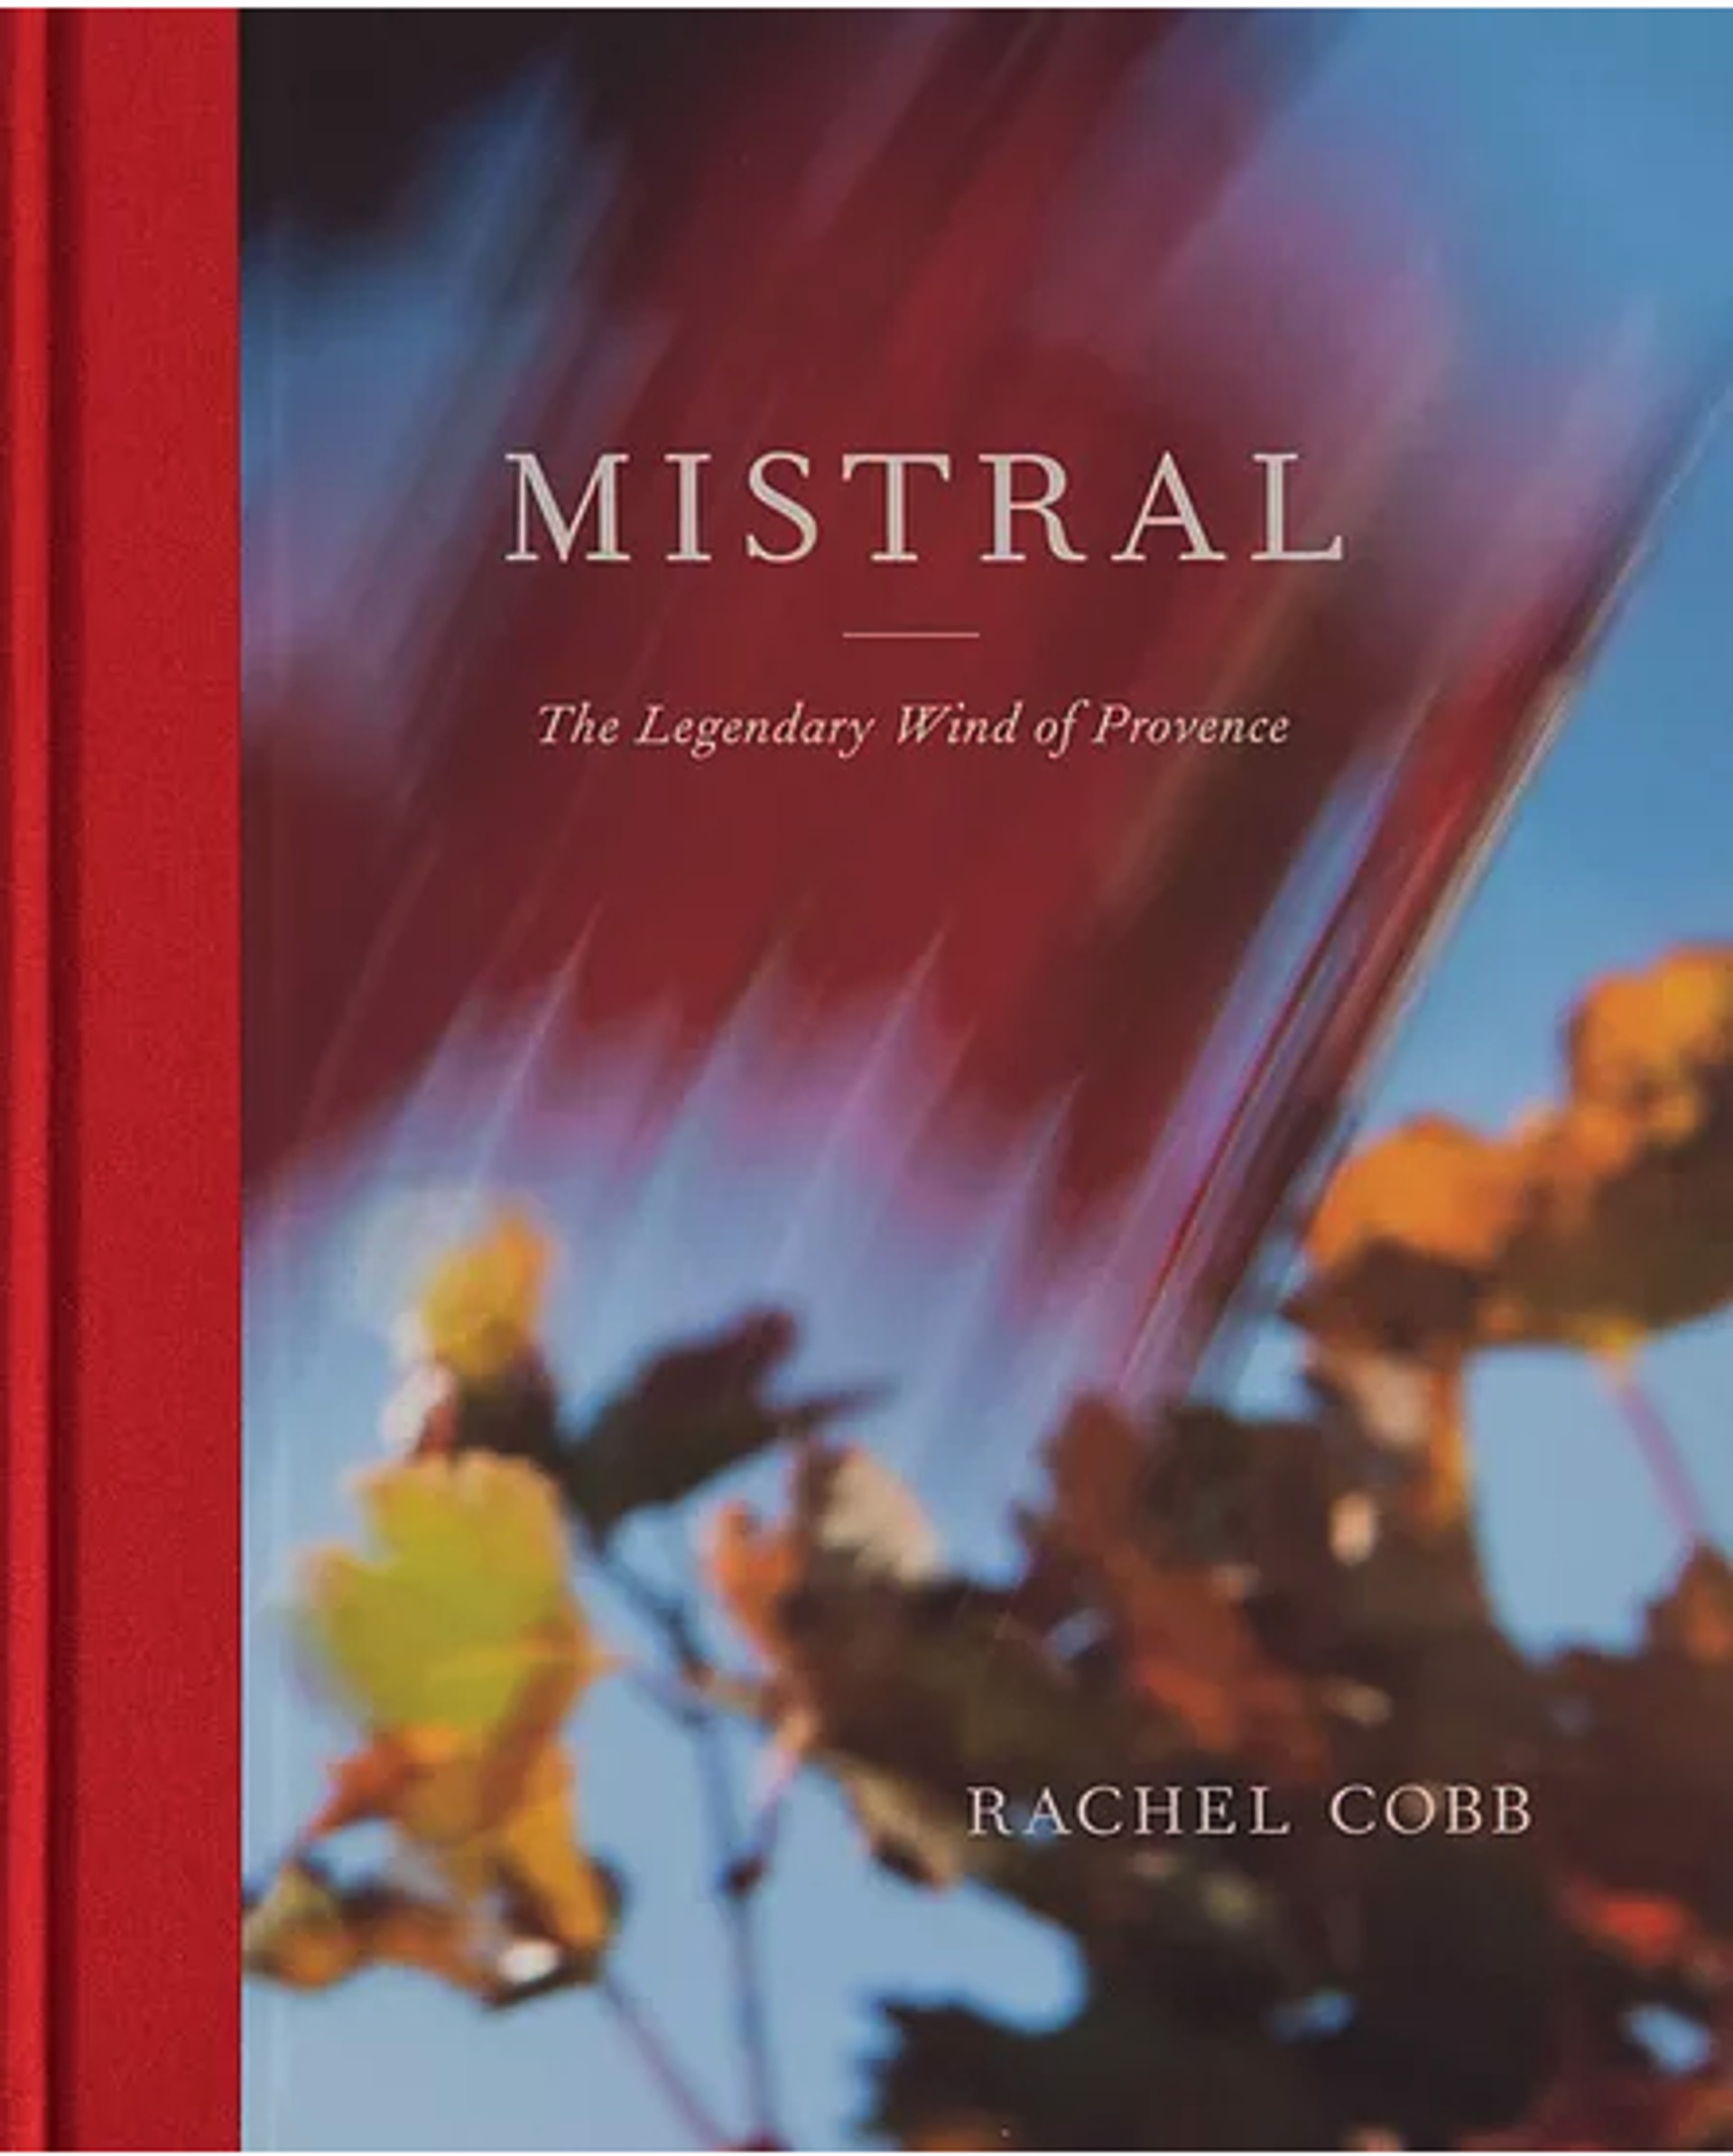 Mistral - The Legendary Wind of Provence by Rachel Cobb